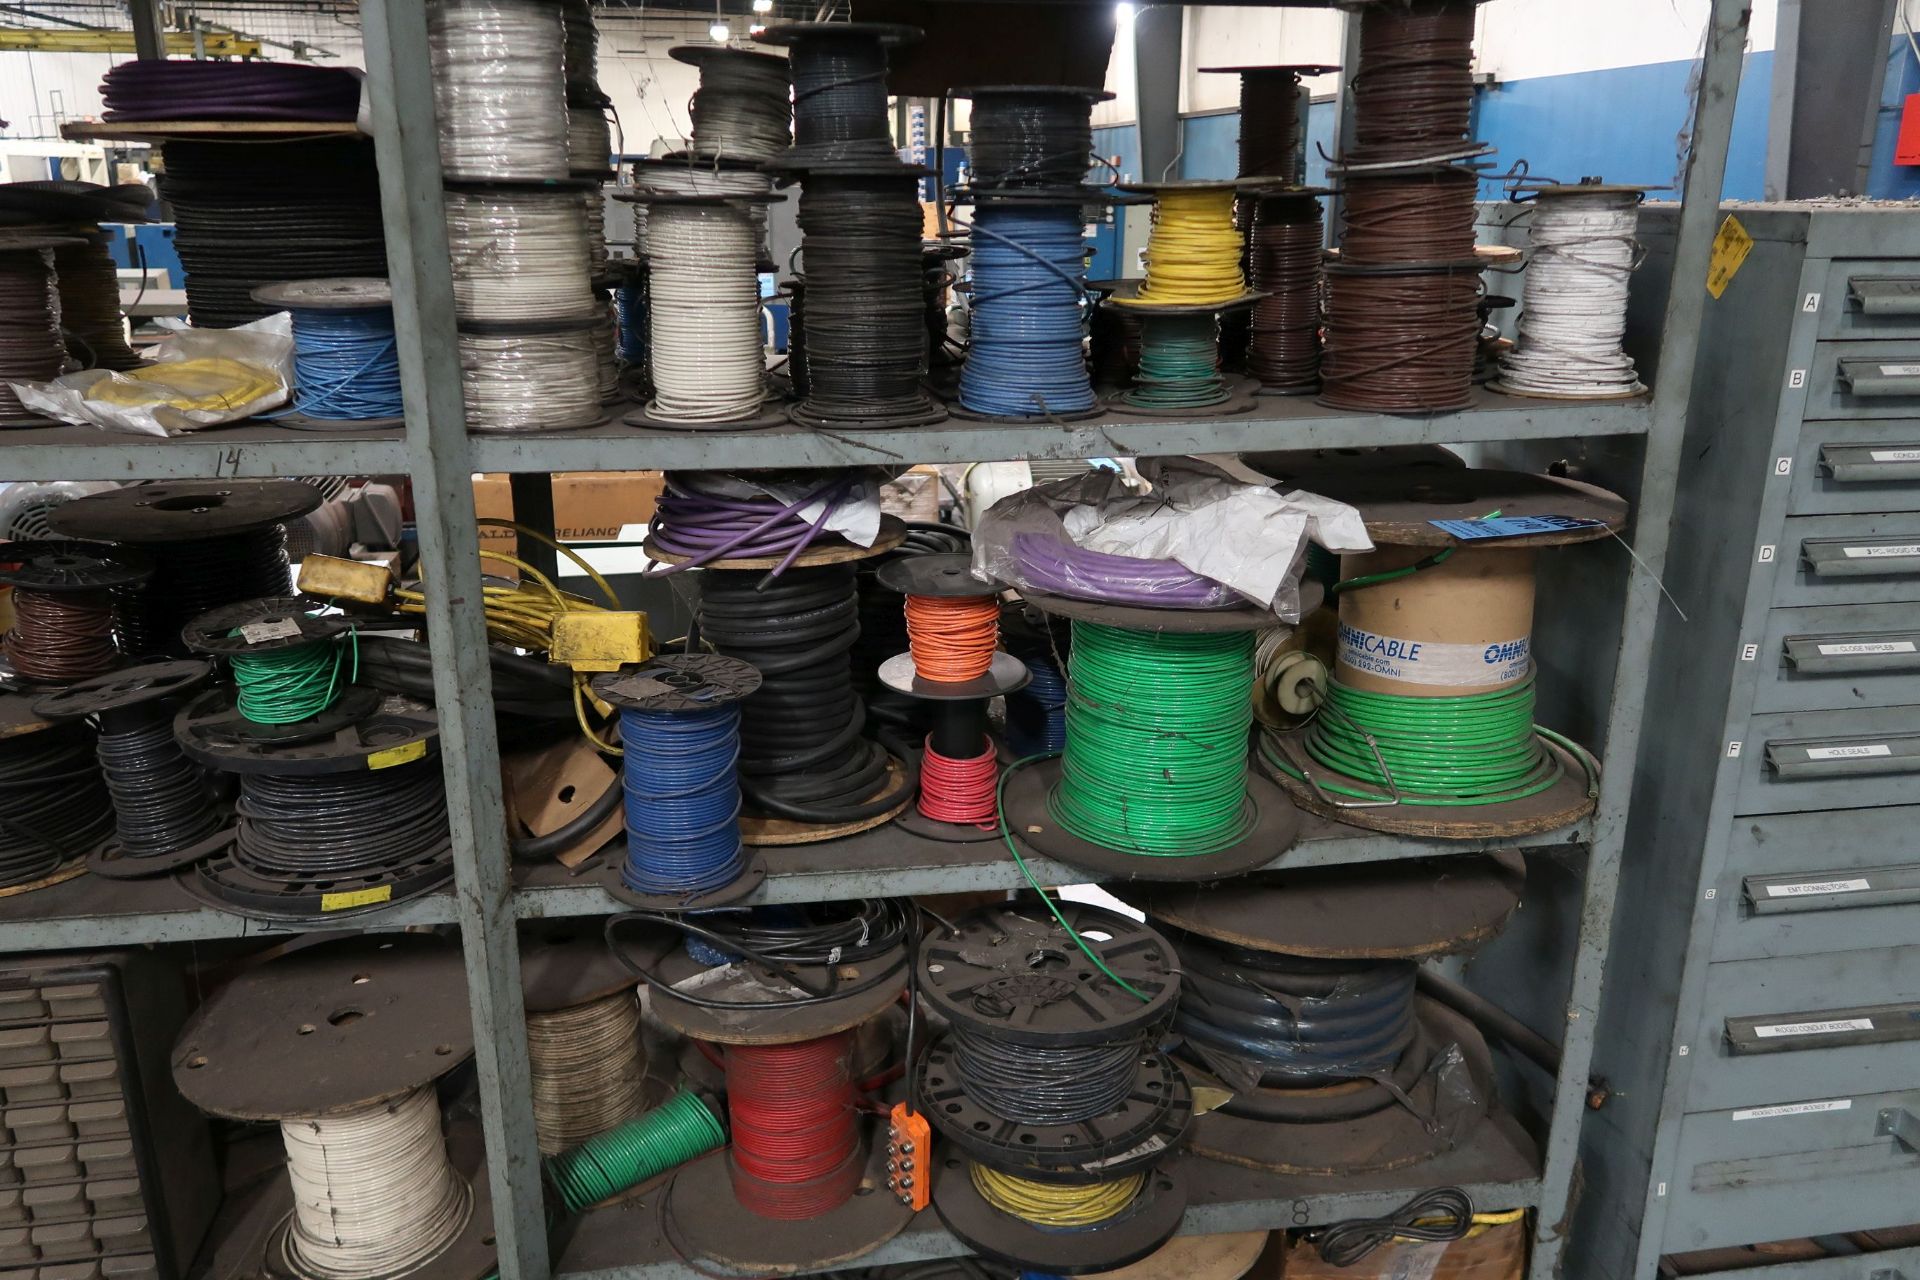 (LOT) WIRE WITH SHELF **LOADING PRICE DUE TO ERRA - $150.00** - Image 3 of 5